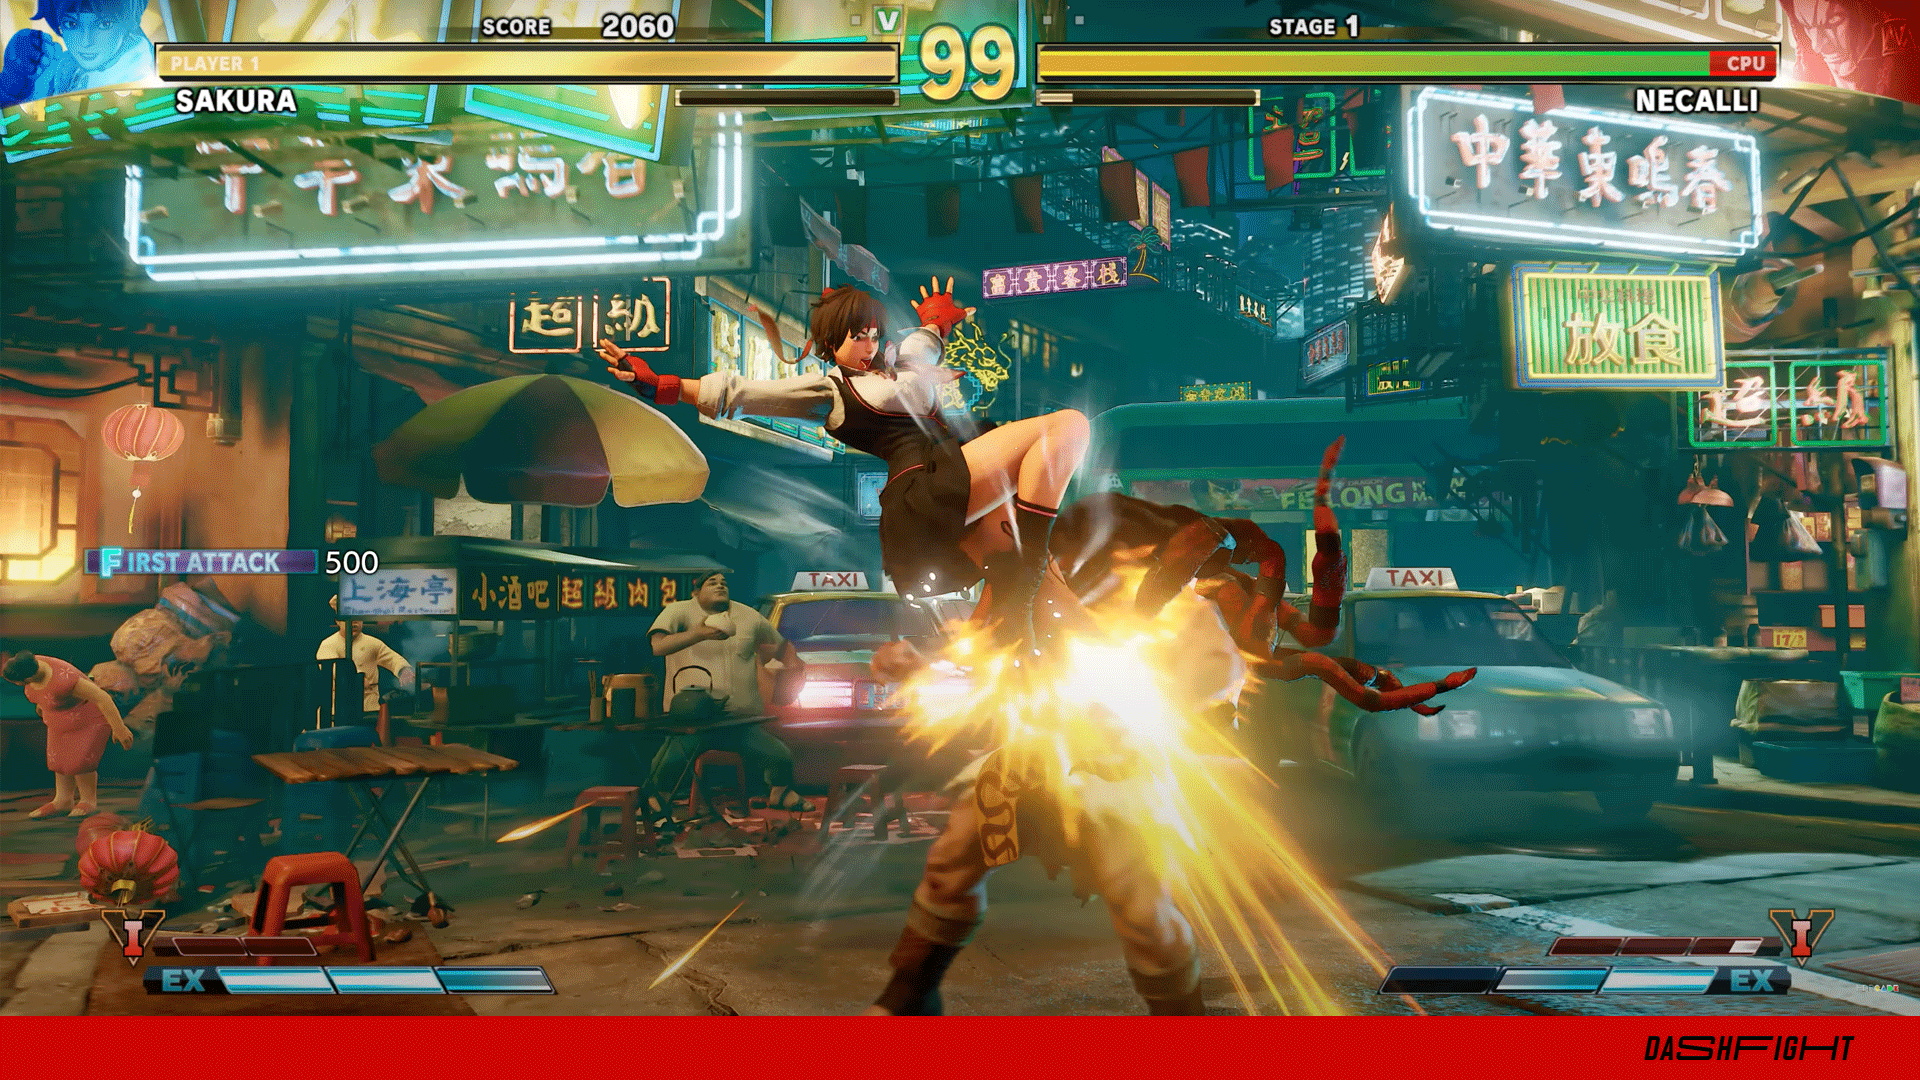 7 tips for your first foray into 'Street Fighter V